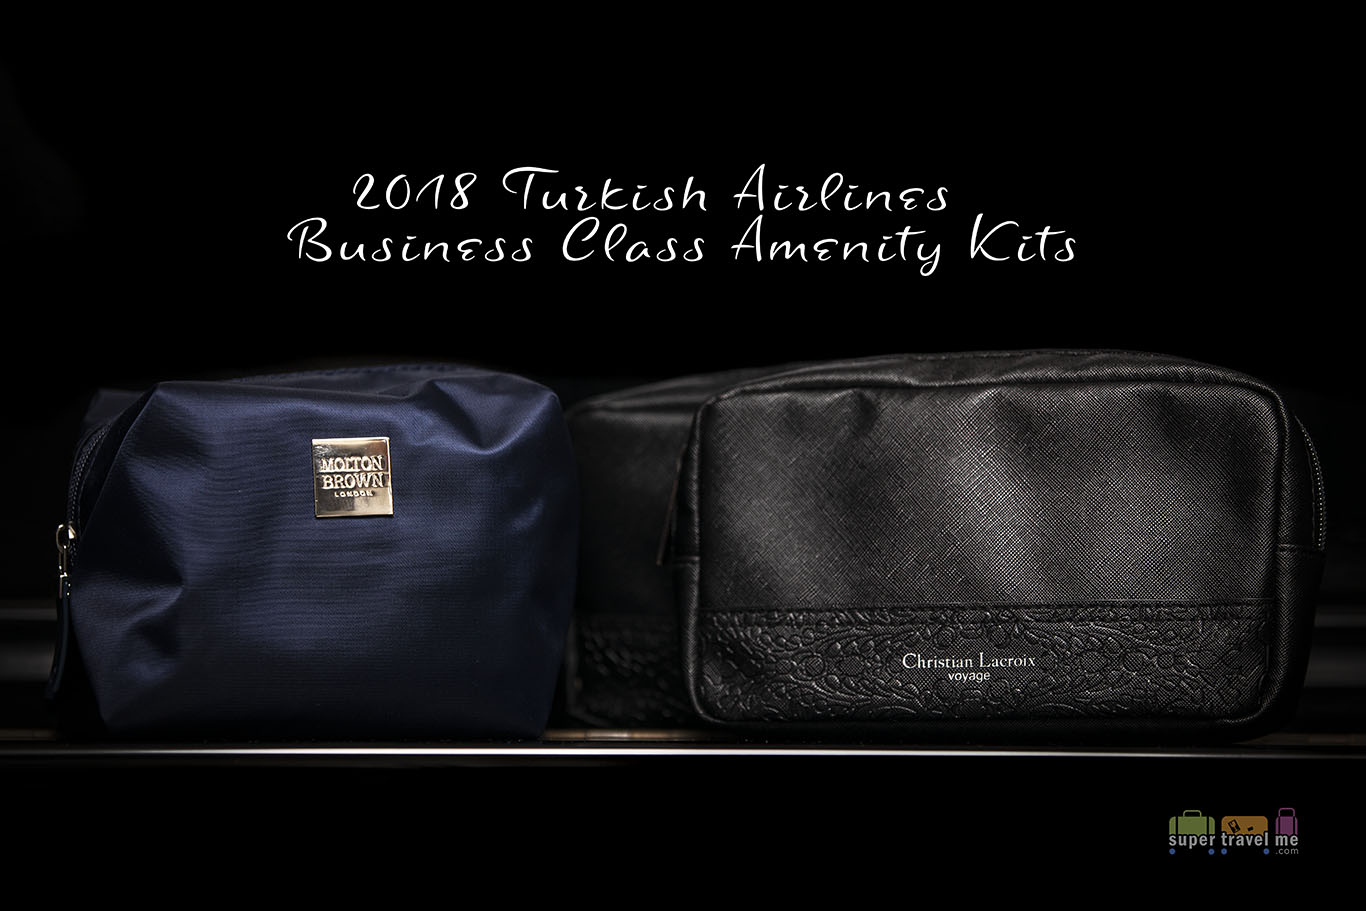 Turkish Airlines launched new Business Class amenity kits in April 2018